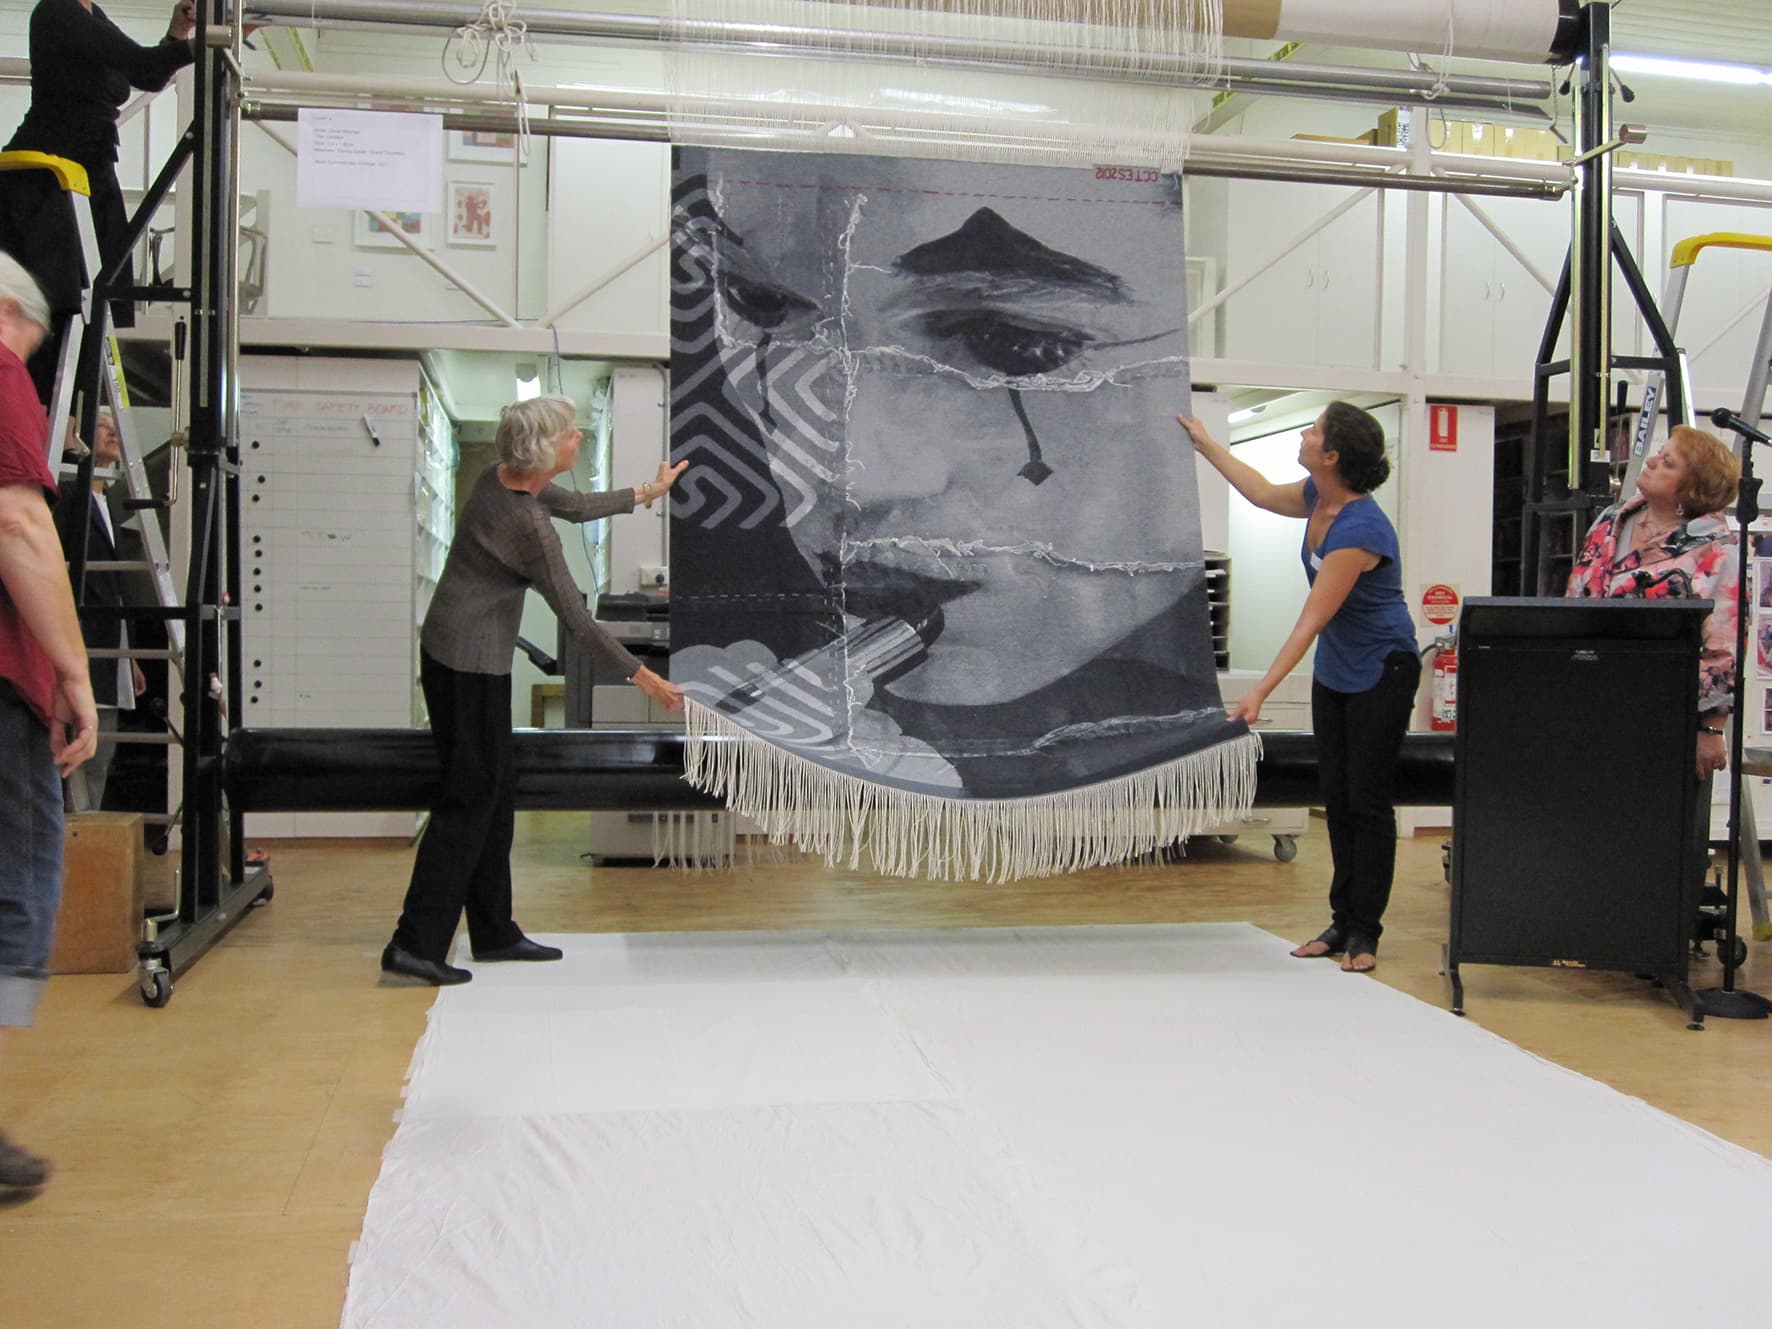 Cutting Off Ceremony for ‘Untitled’ 2012, designed by David Noonan, woven by Emma Sulzer & Cheryl Thornton, wool and cotton, 2.00 x 1.63m. Photograph: ATW.